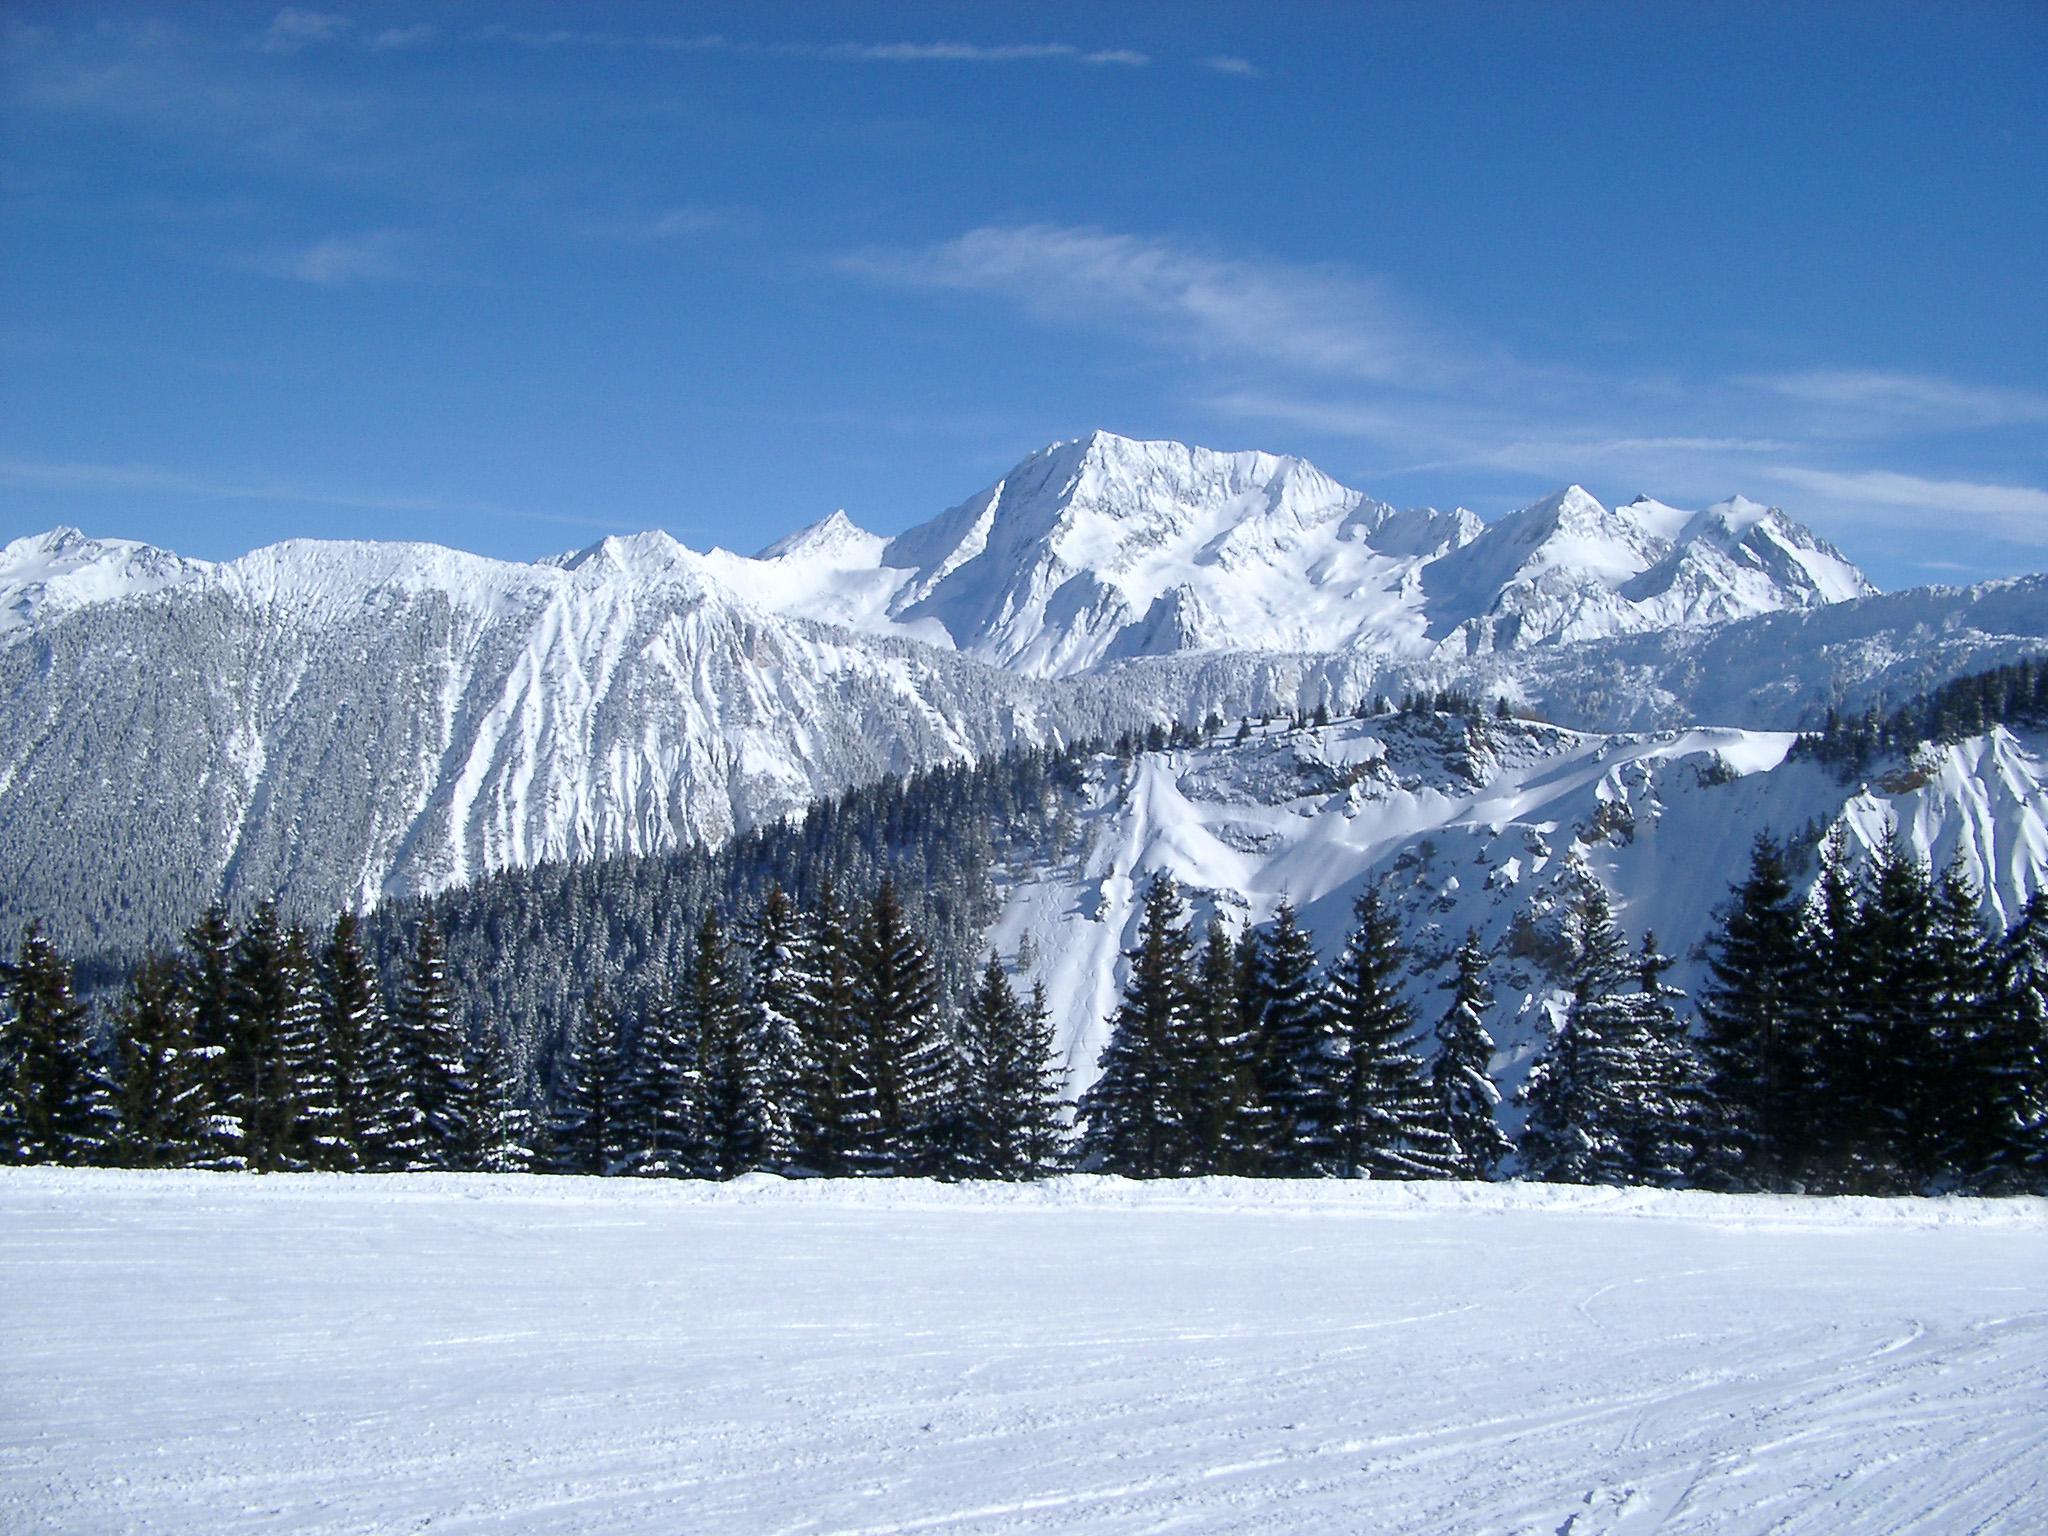  Mountains Fir Trees and Wide Field Filled with Snow on Winter Holiday